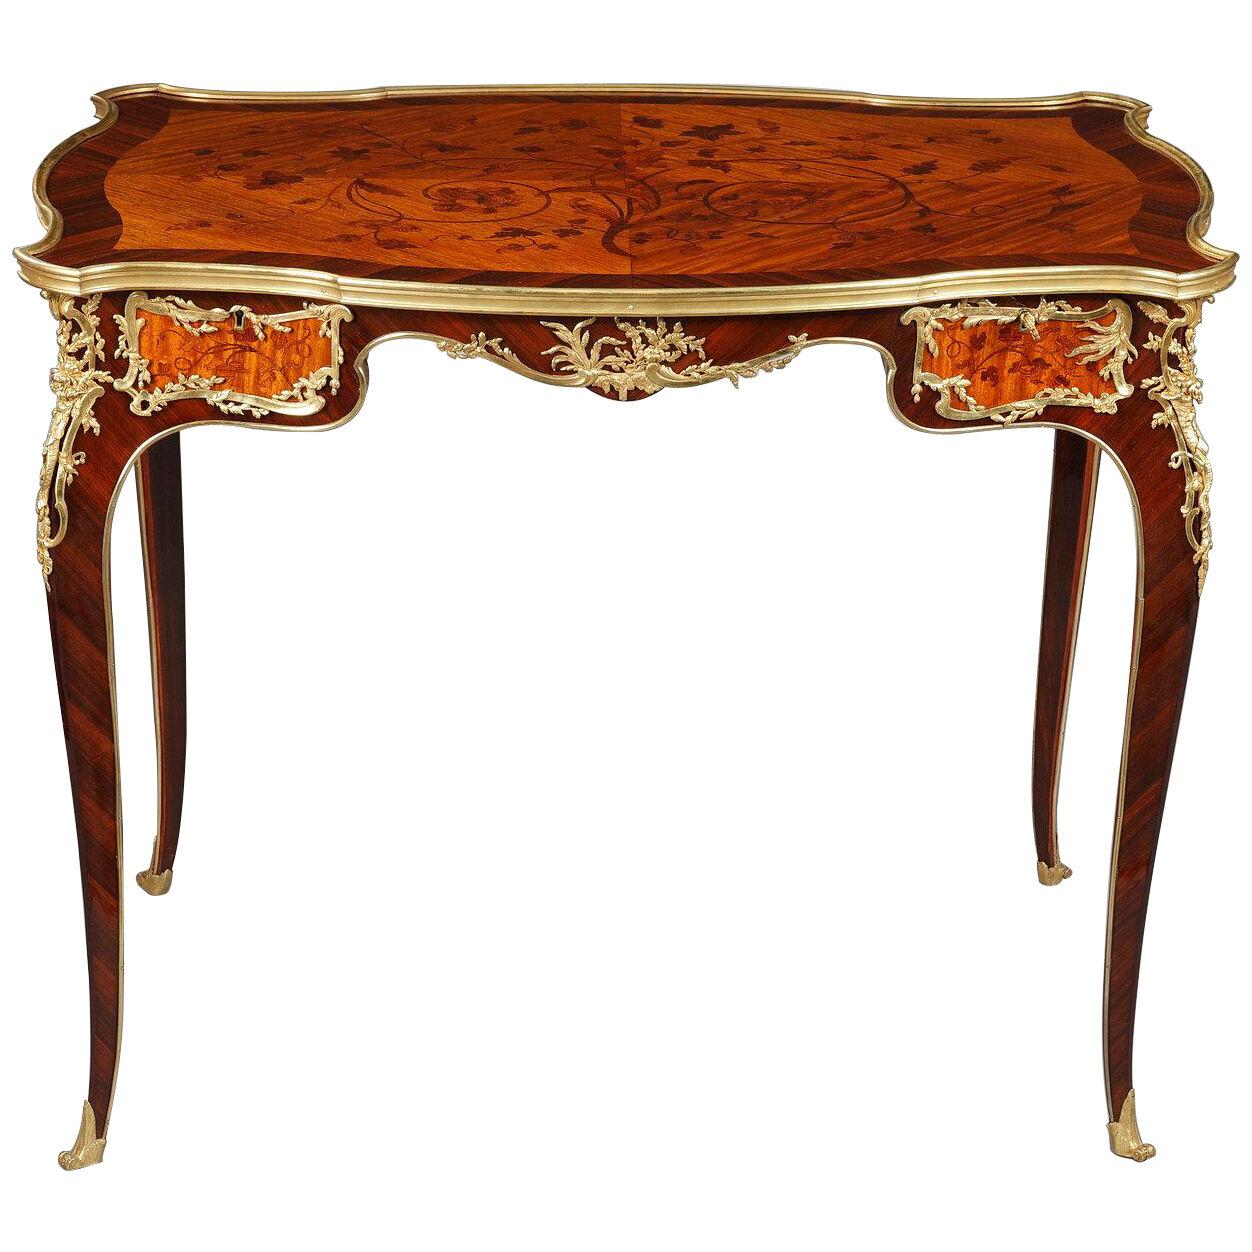 Louis XV Style Table Attributed to J.E. Zwiener, France, Circa 1880